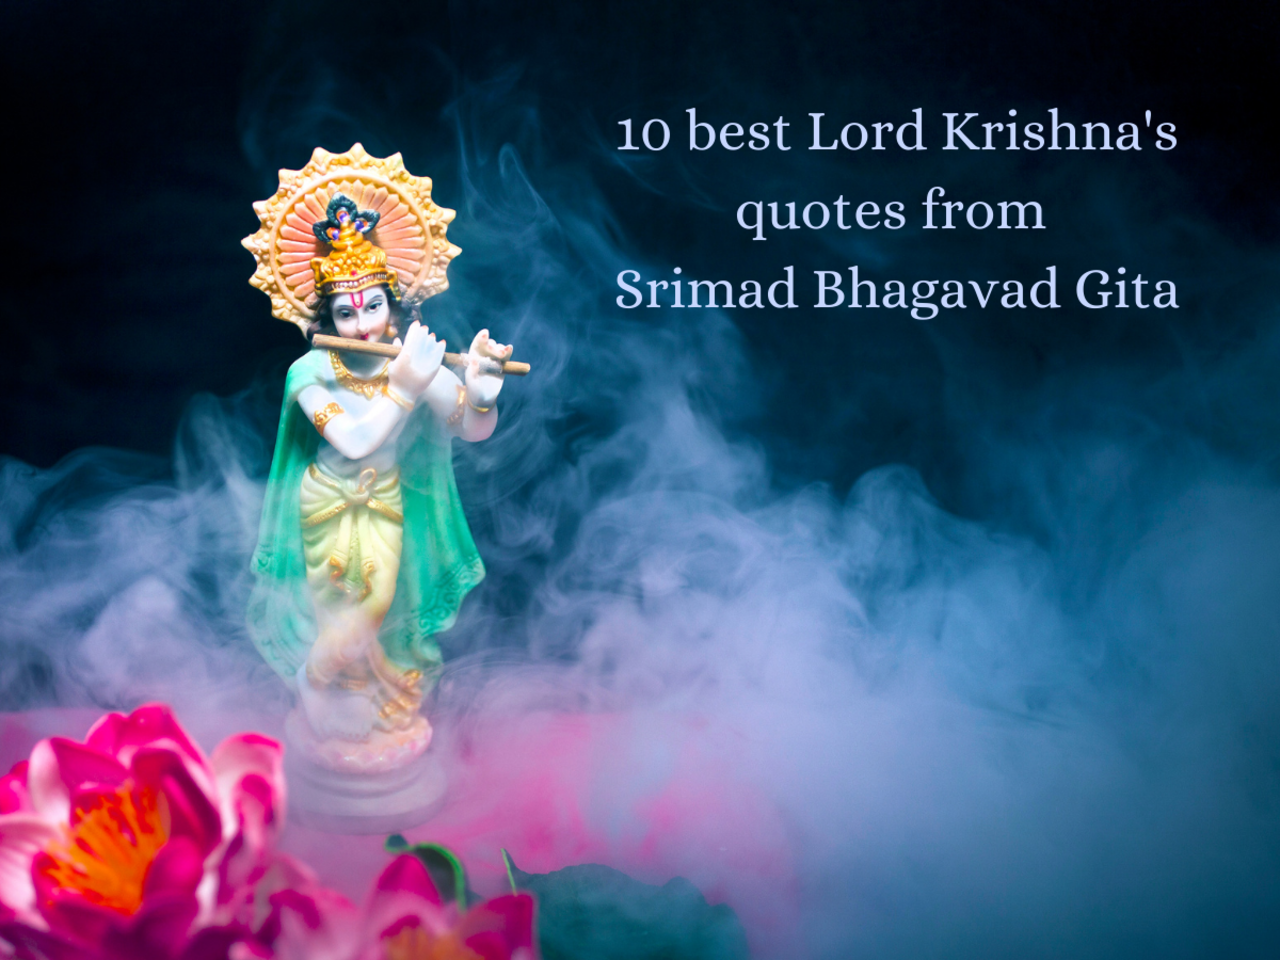 krishna janmashtami quotes, wishes & messages: 10 best Lord Krishna's  quotes from Srimad Bhagavad Gita | - Times of India